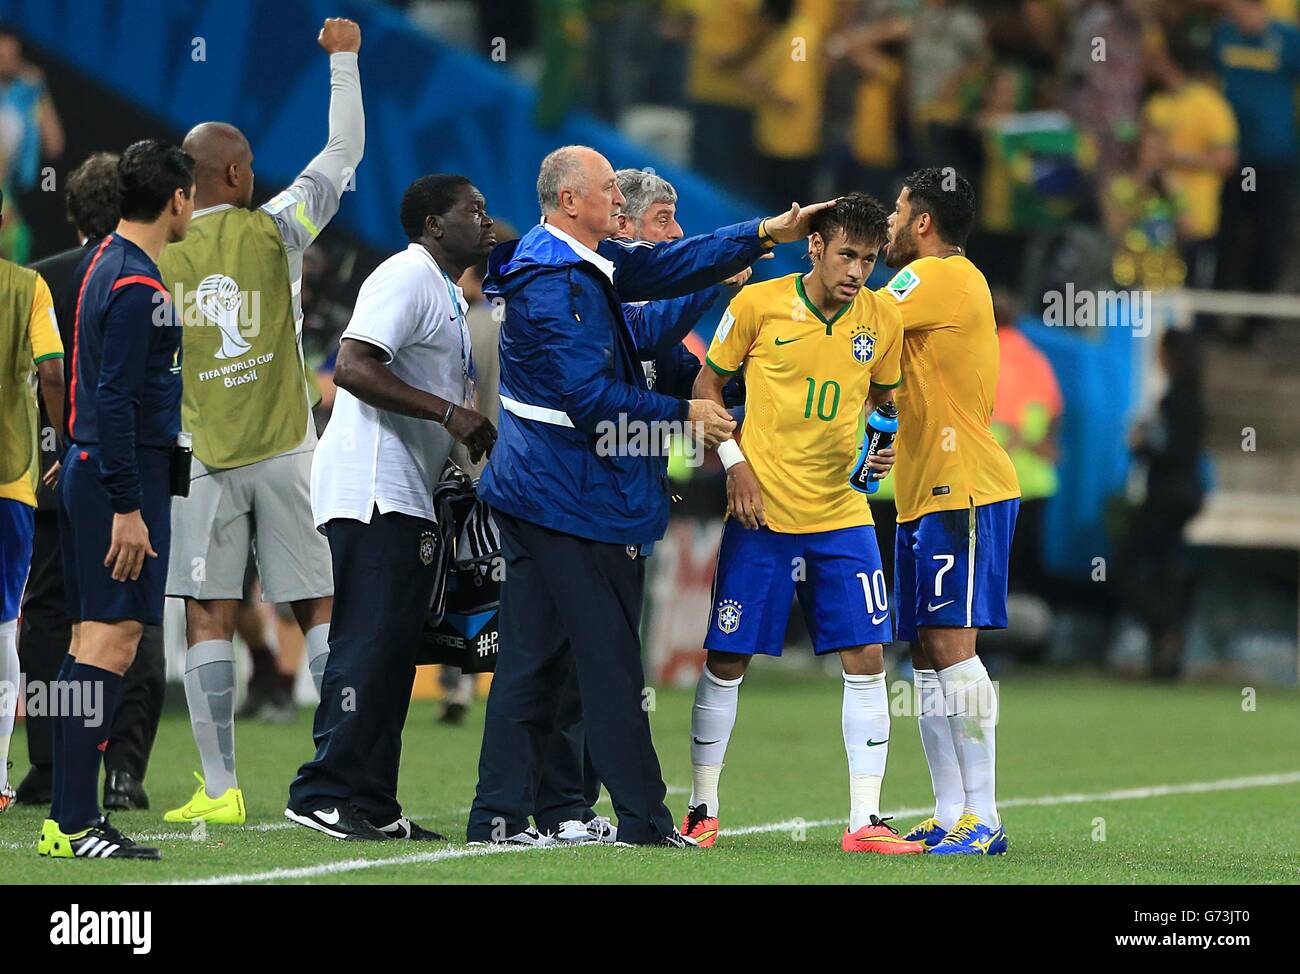 Soccer - FIFA World Cup 2014 - Group A - Brazil v Croatia - Arena Corinthians. Brazil's Neymar (10) celebrates on the touchline with manager Luiz Felipe Scolari after scoring his side's first goal Stock Photo